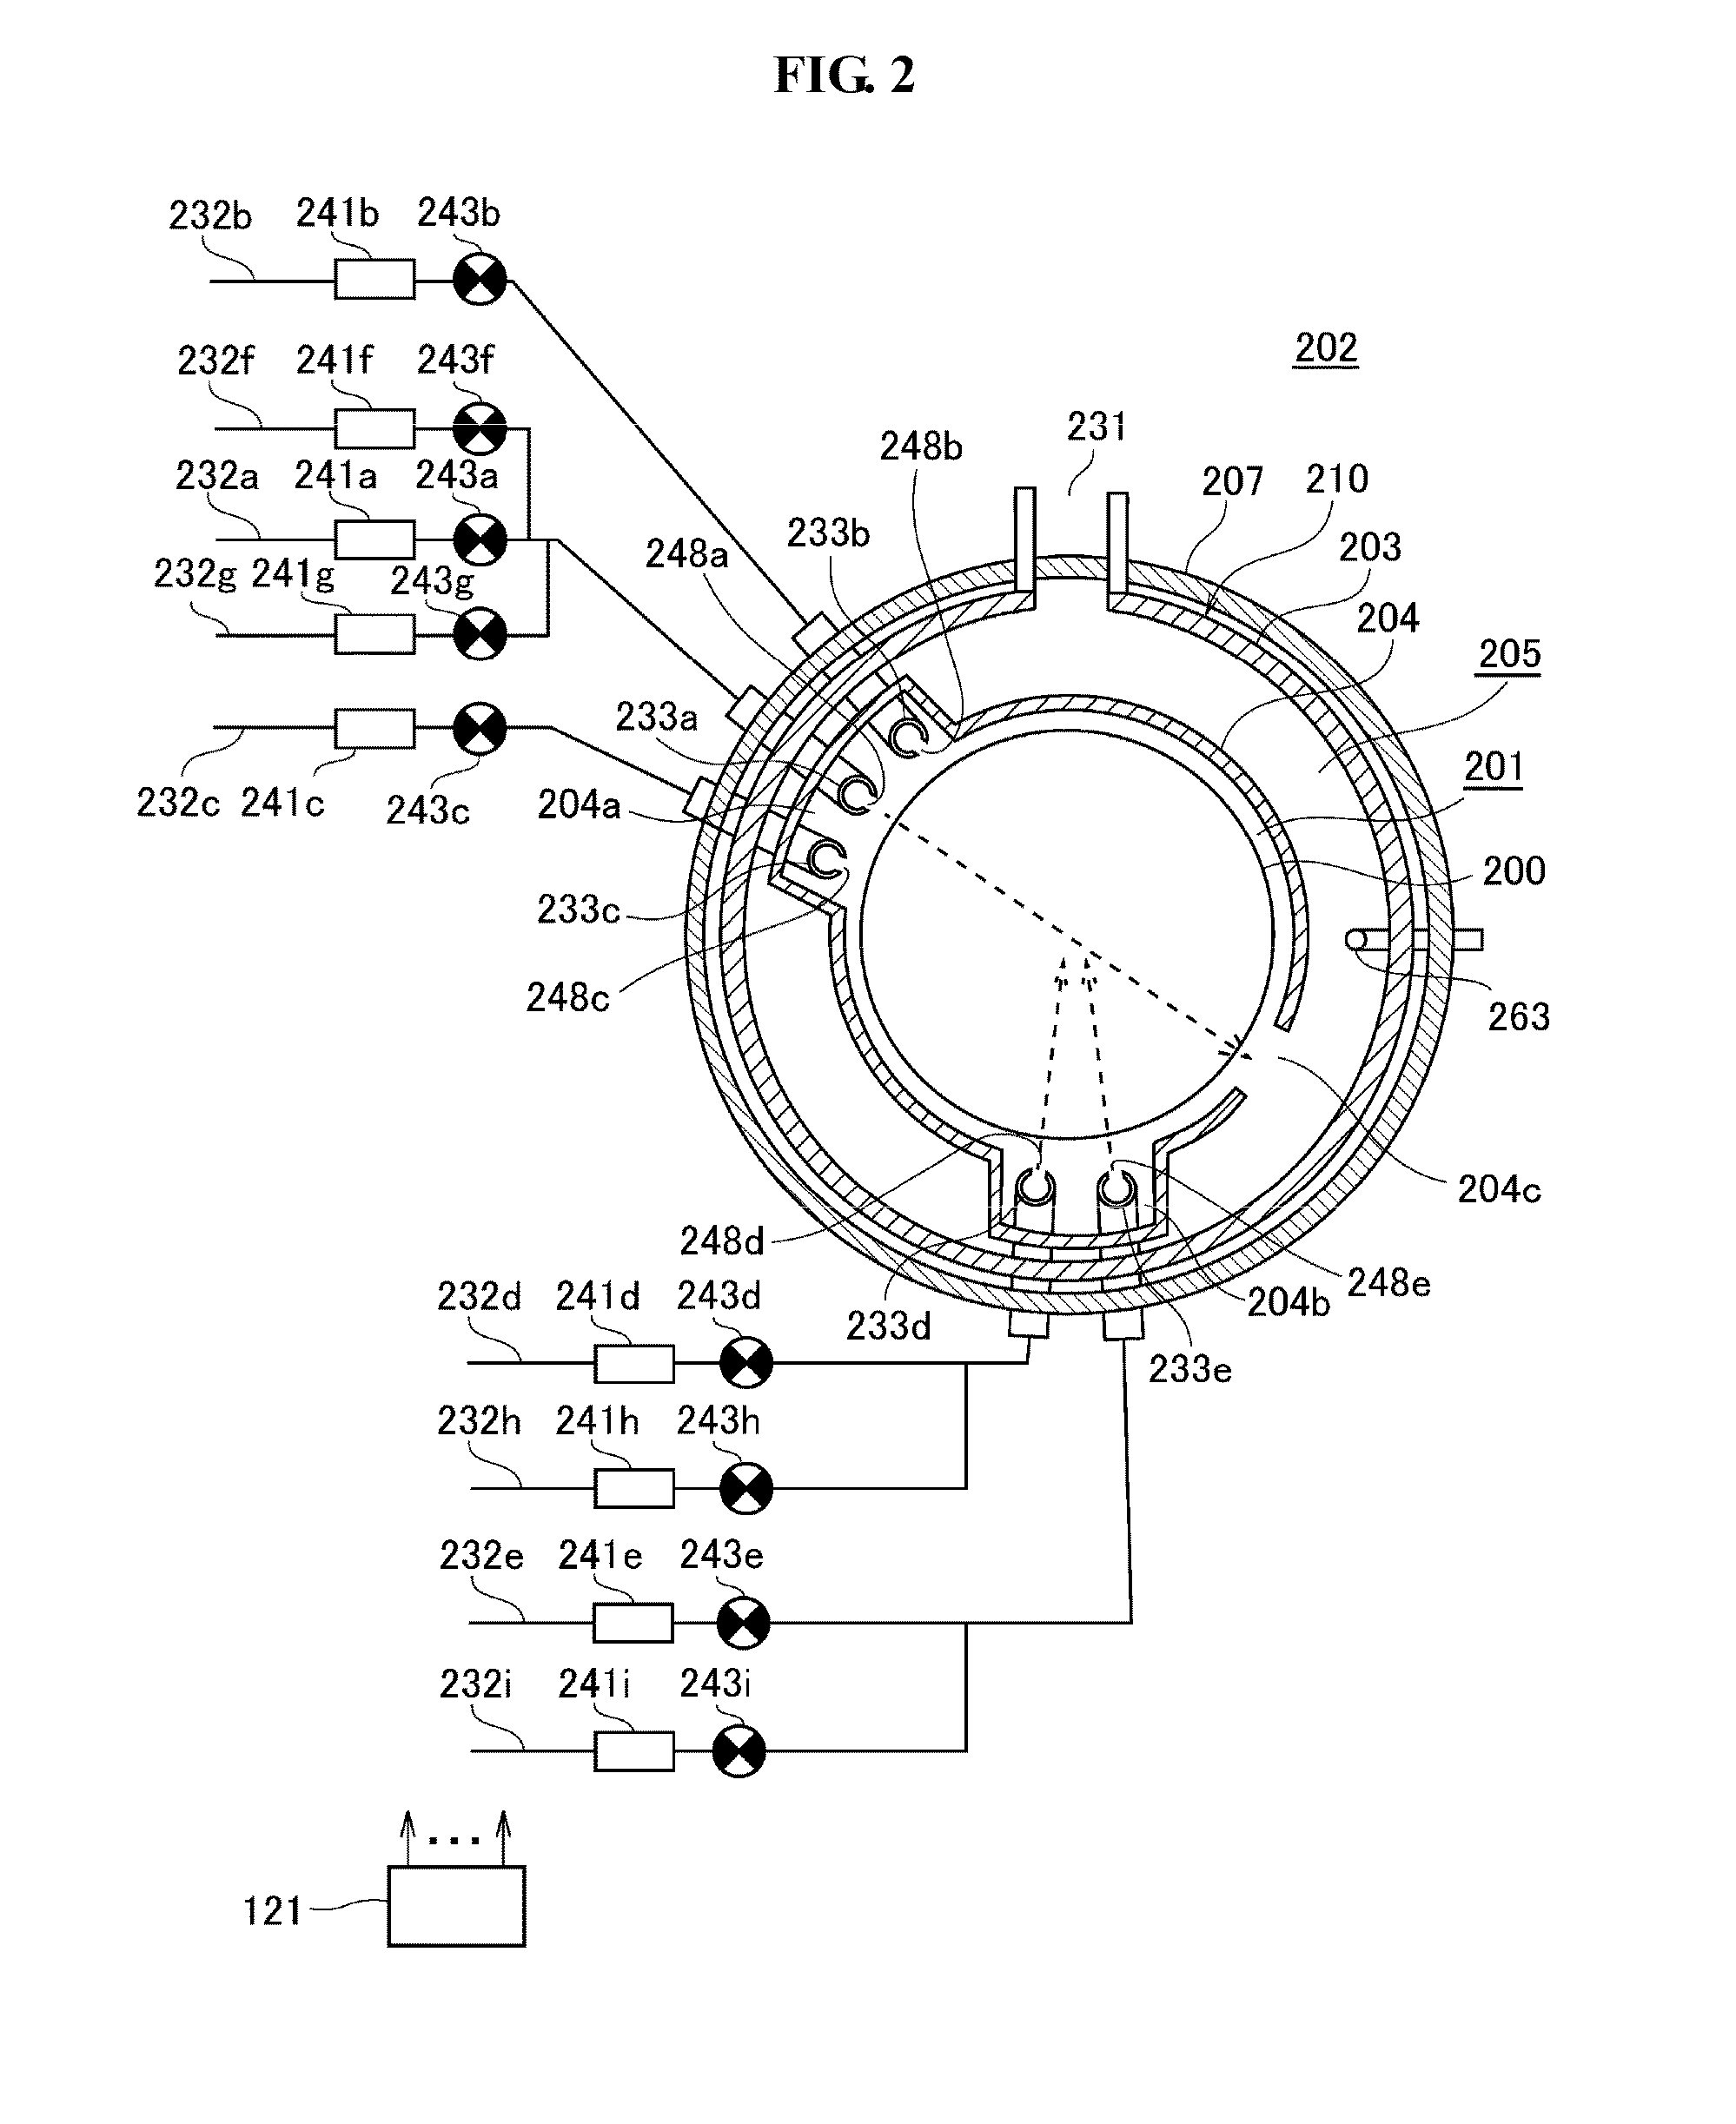 Substrate processing apparatus, method of manufacturing semiconductor device, and non-transitory computer-readable recording medium